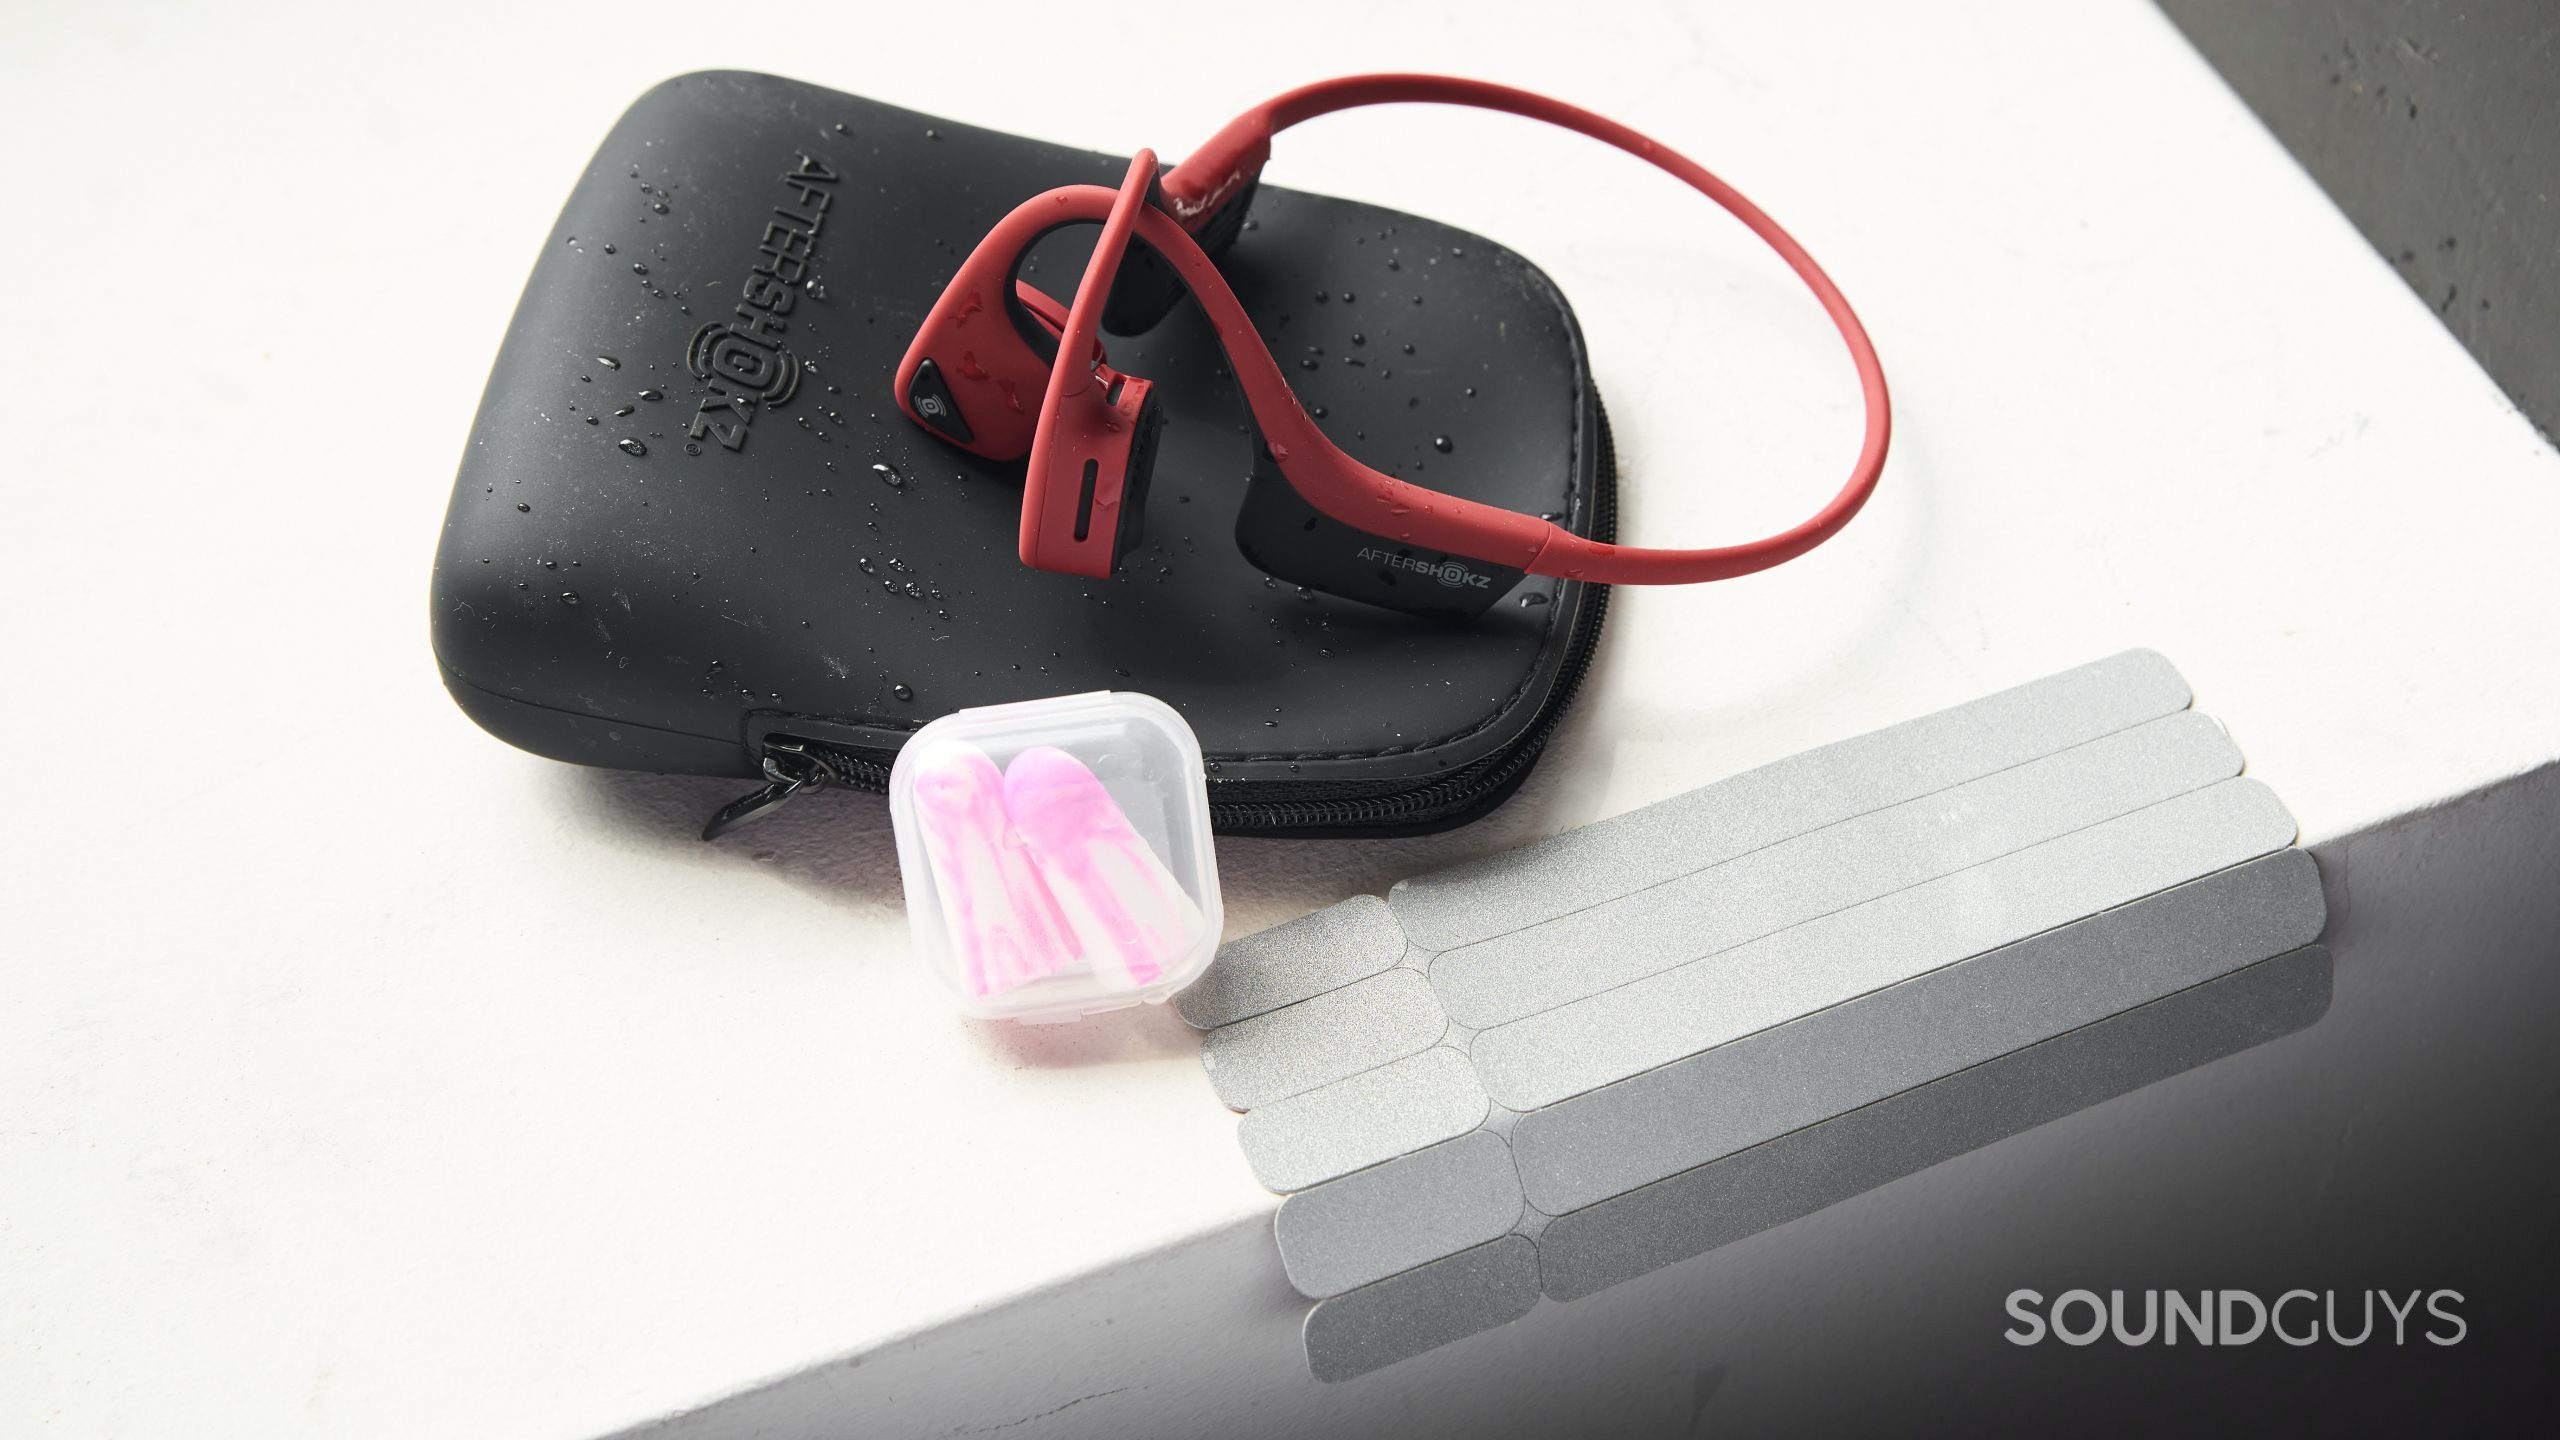 The AfterShokz Air bone conduction headphones, ear plugs, carrying case, and reflective stickers all next to each other.